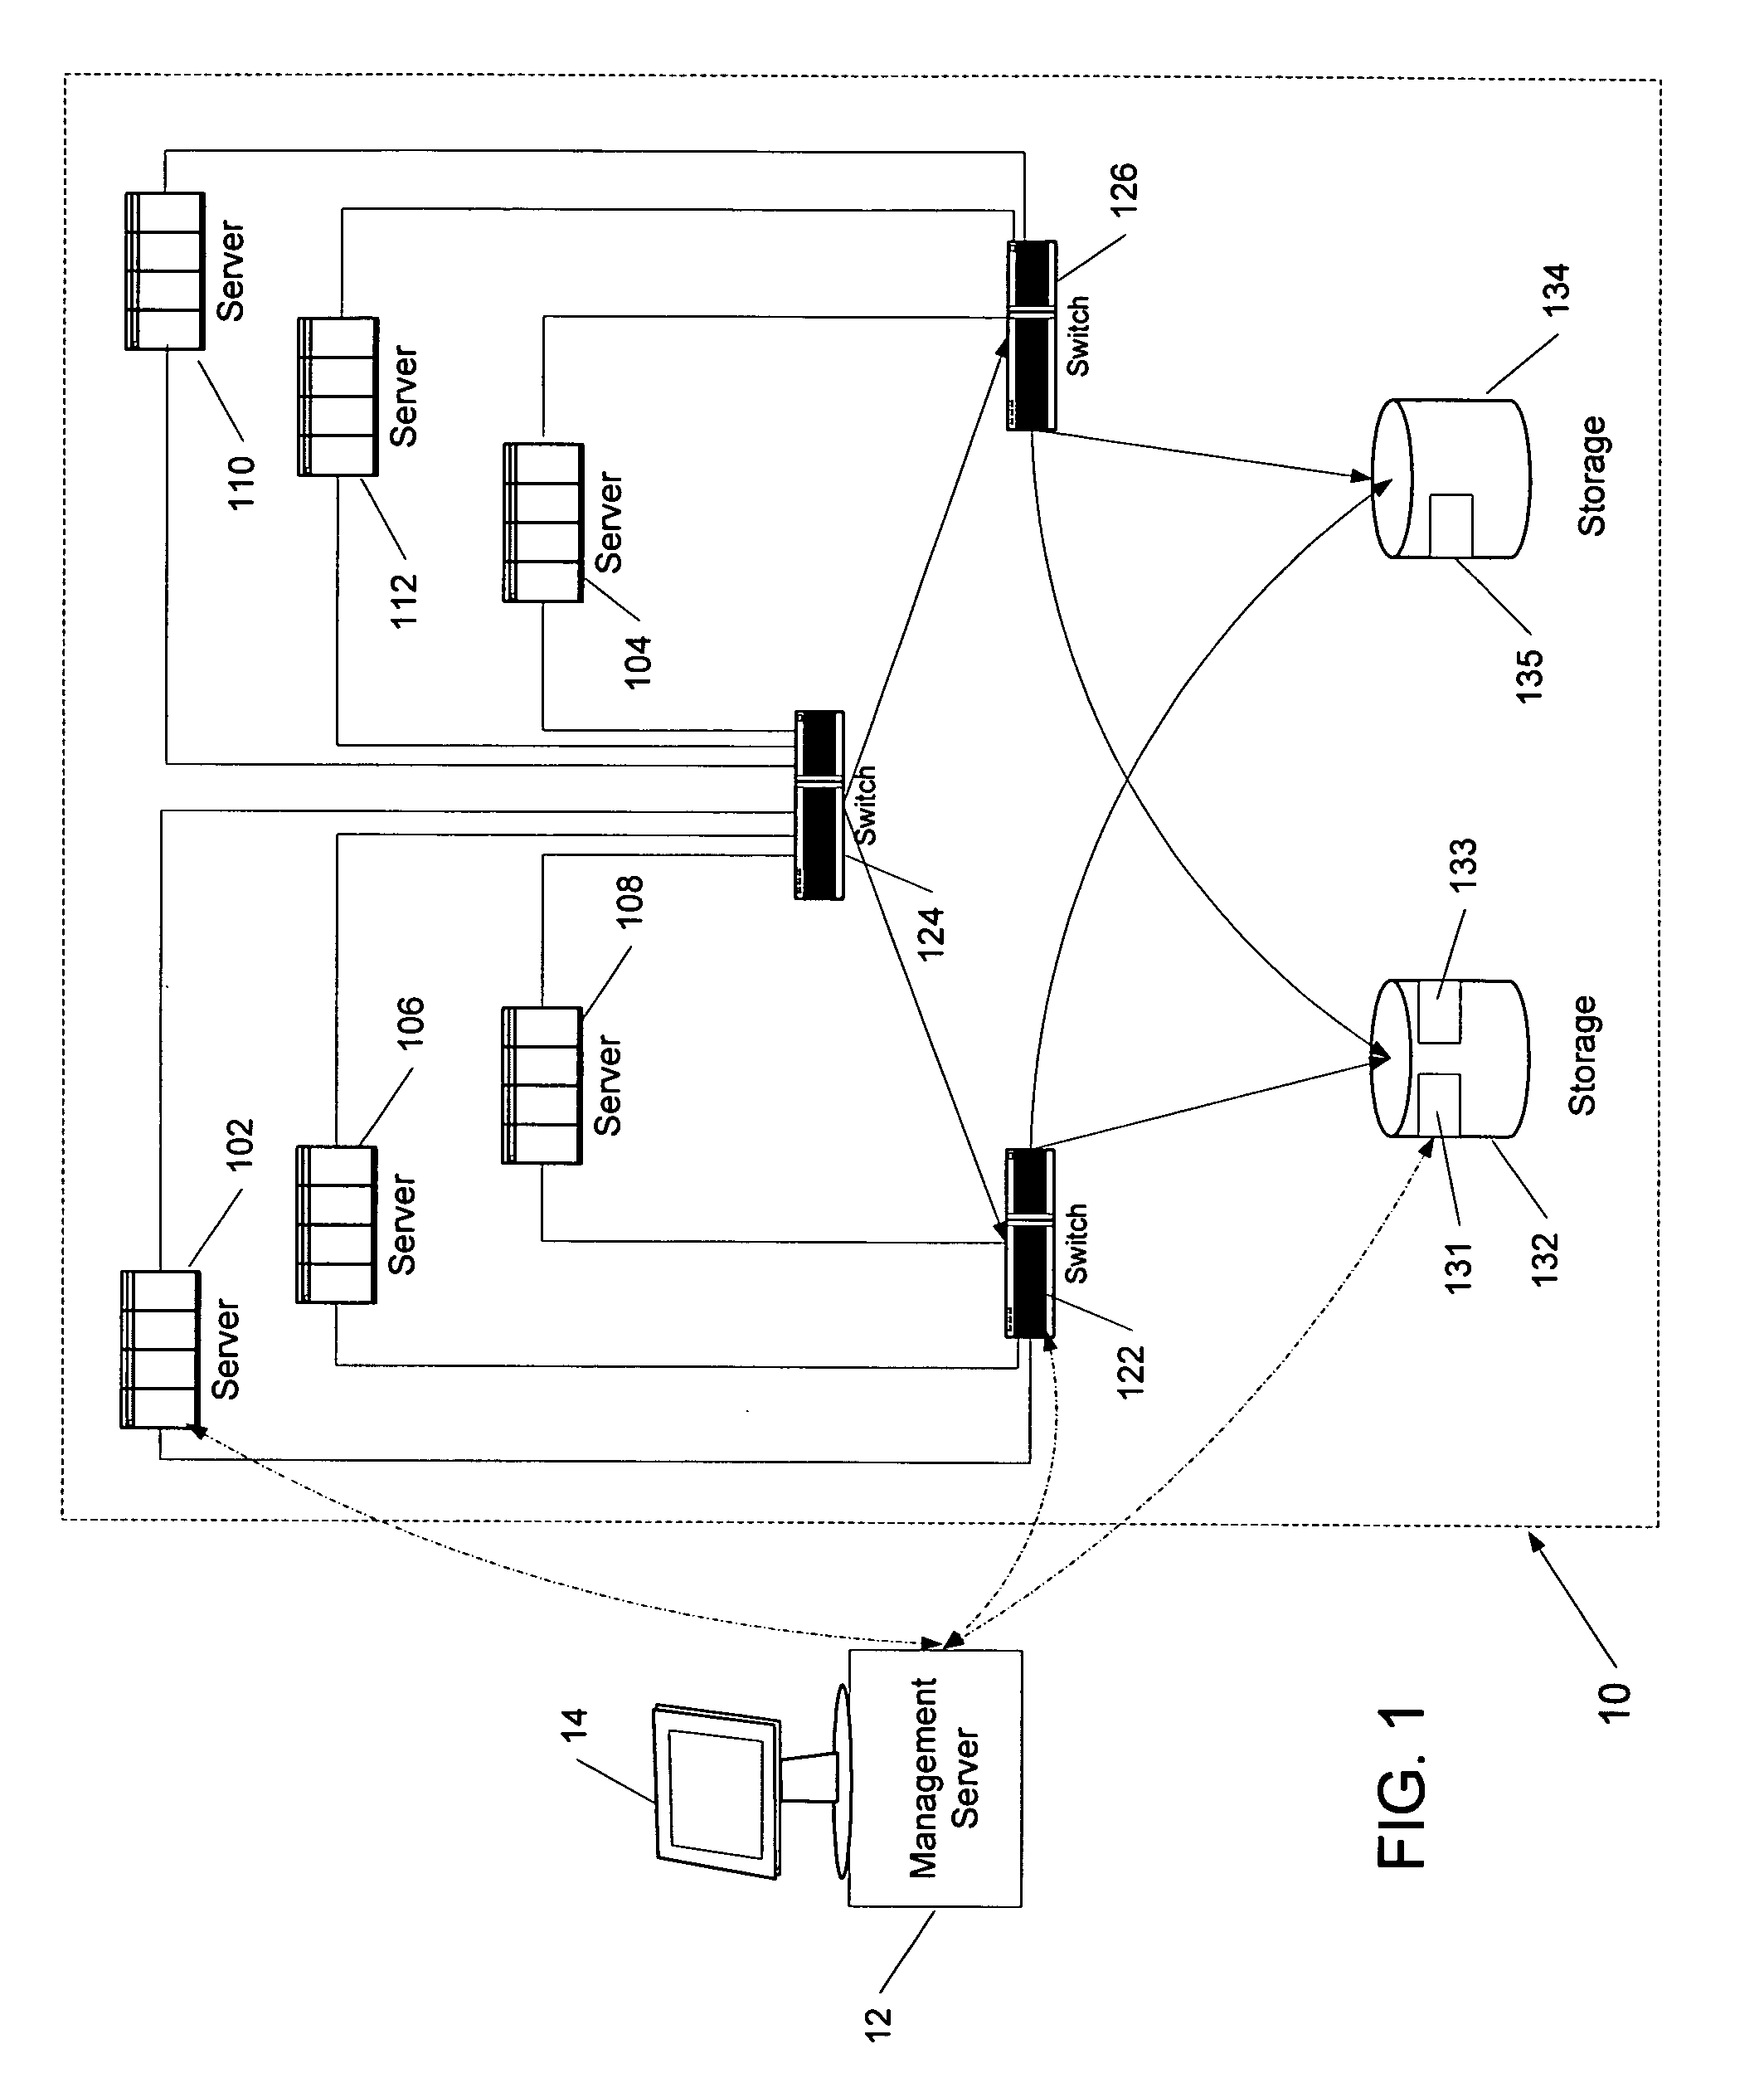 Methods and systems for history analysis for access paths in networks